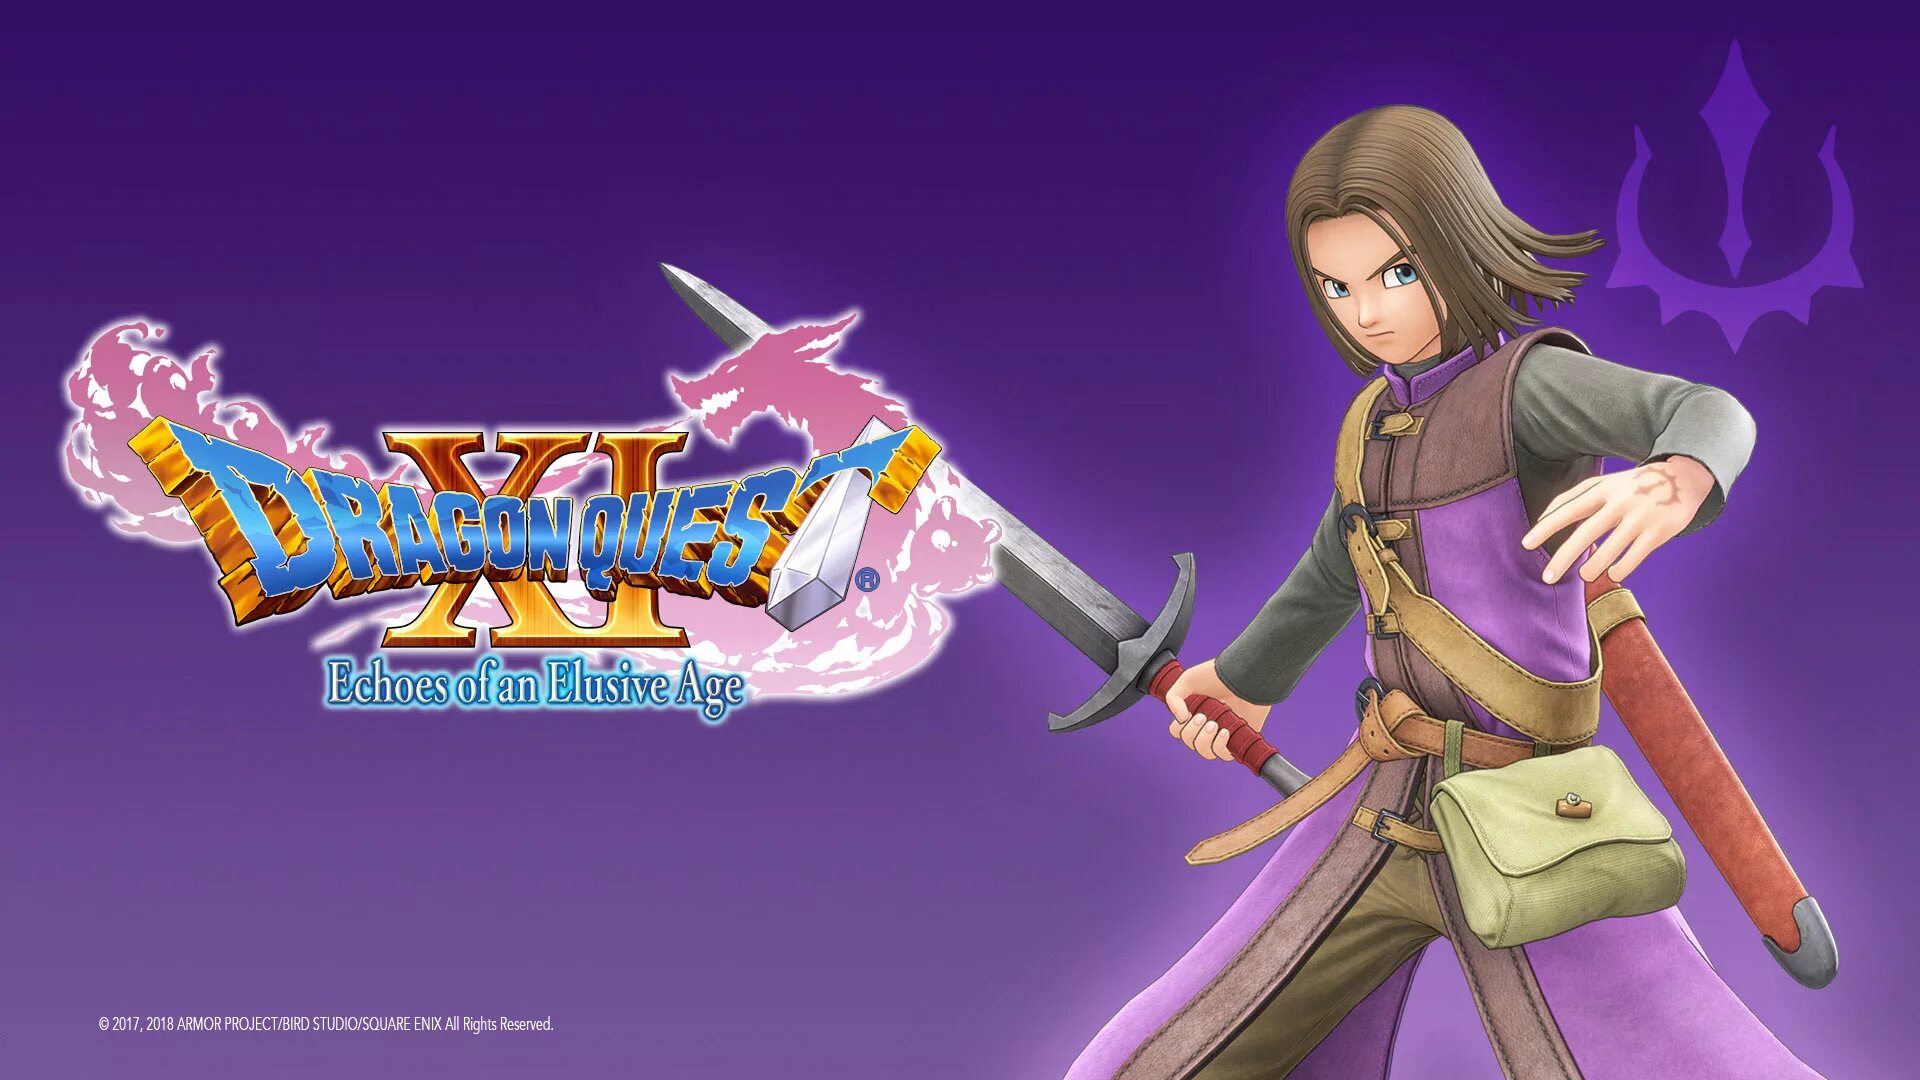 Dragon Quest 11. Dragon Quest XI: Echoes of an elusive age. Dragon Quest XI S: Echoes of an elusive age - Definitive Edition. Dragon Quest 11: Echoes of an elusive age — Definitive Edition.